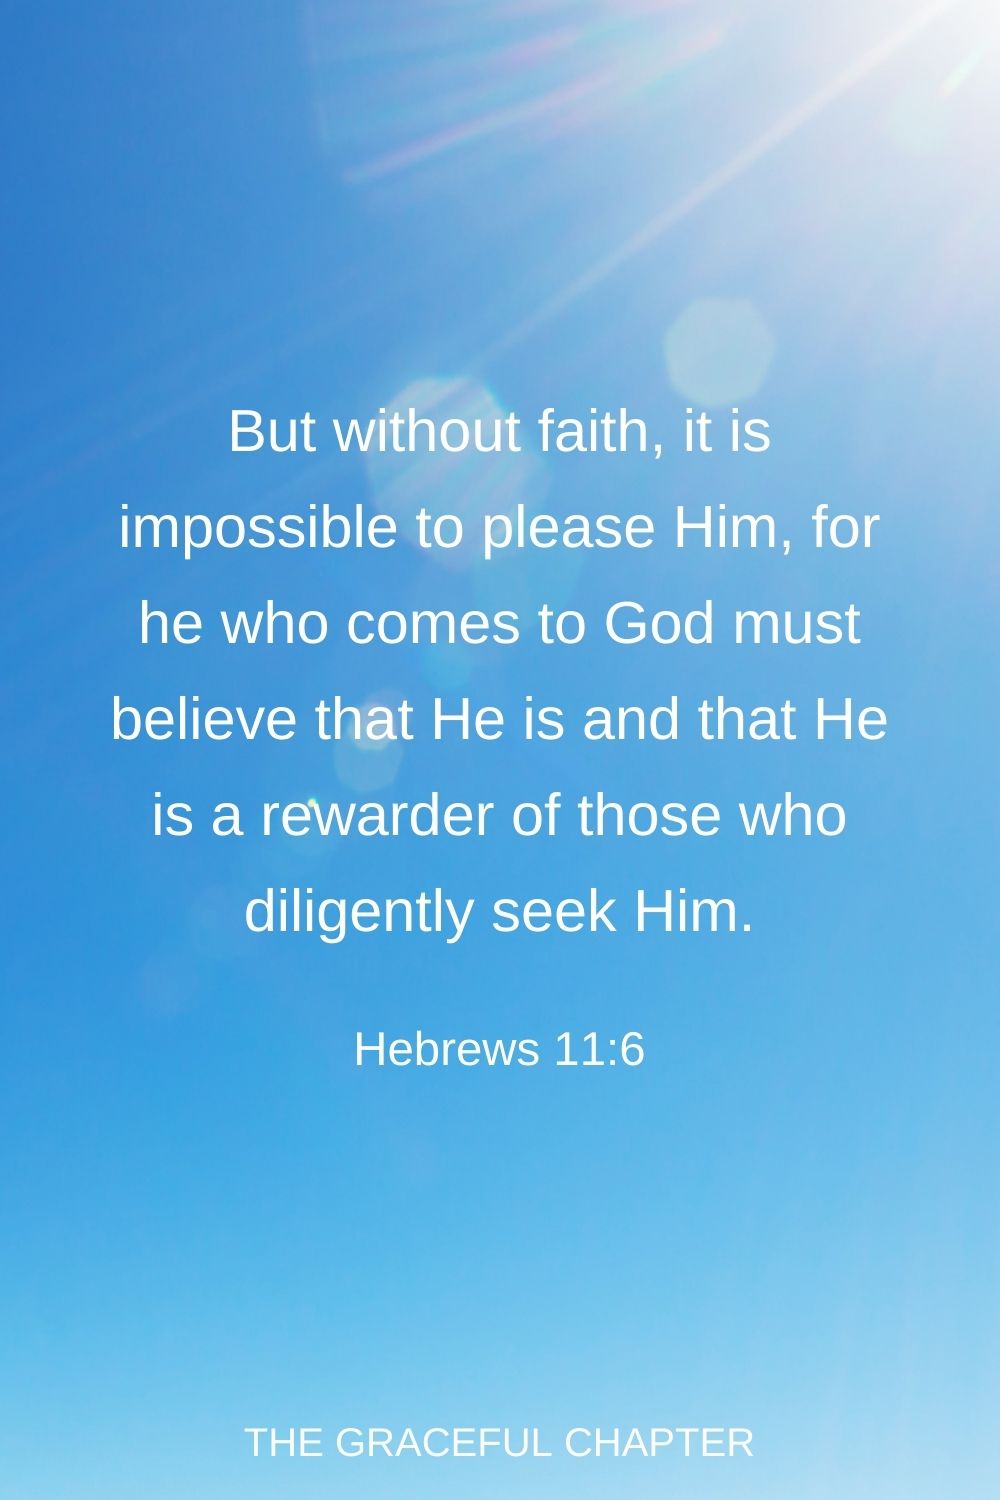 But without faith, it is impossible to please Him, for he who comes to God must believe that He is and that He is a rewarder of those who diligently seek Him. Hebrews 11:6